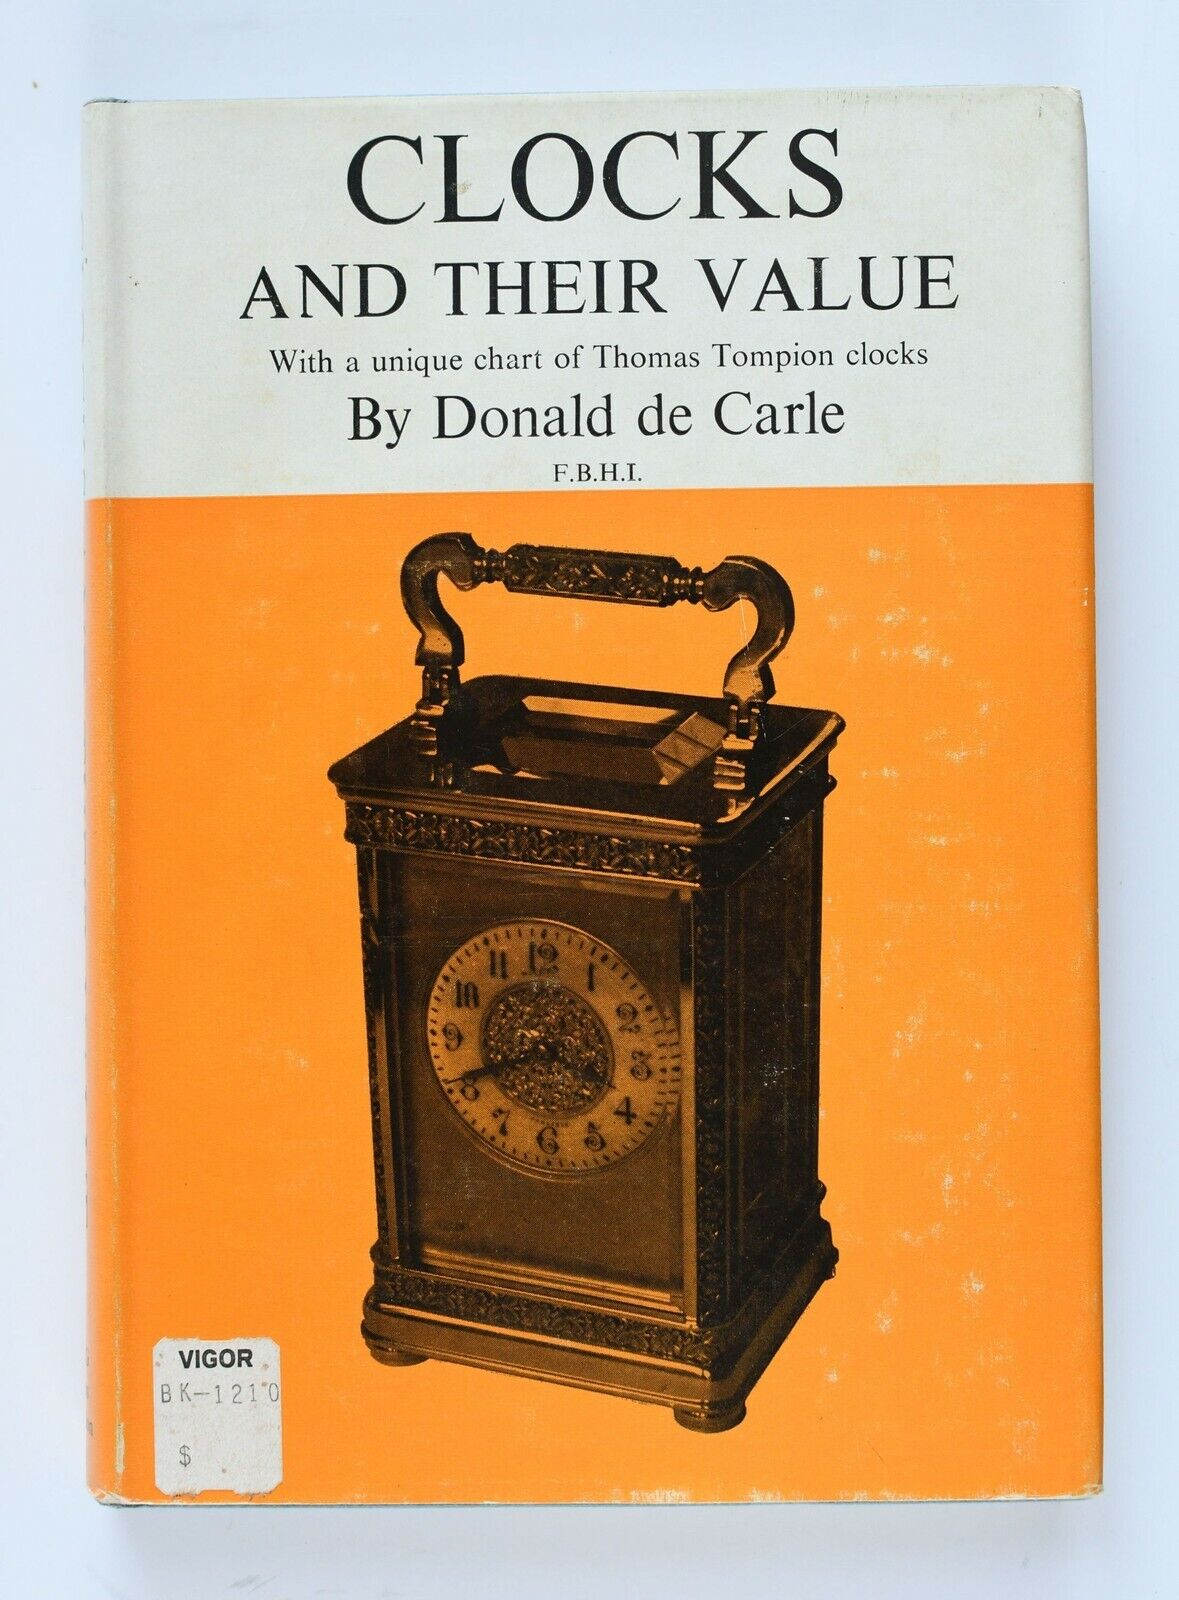 Clocks and their Value with Thomas Tompion Clocks chart by Donald de Carle